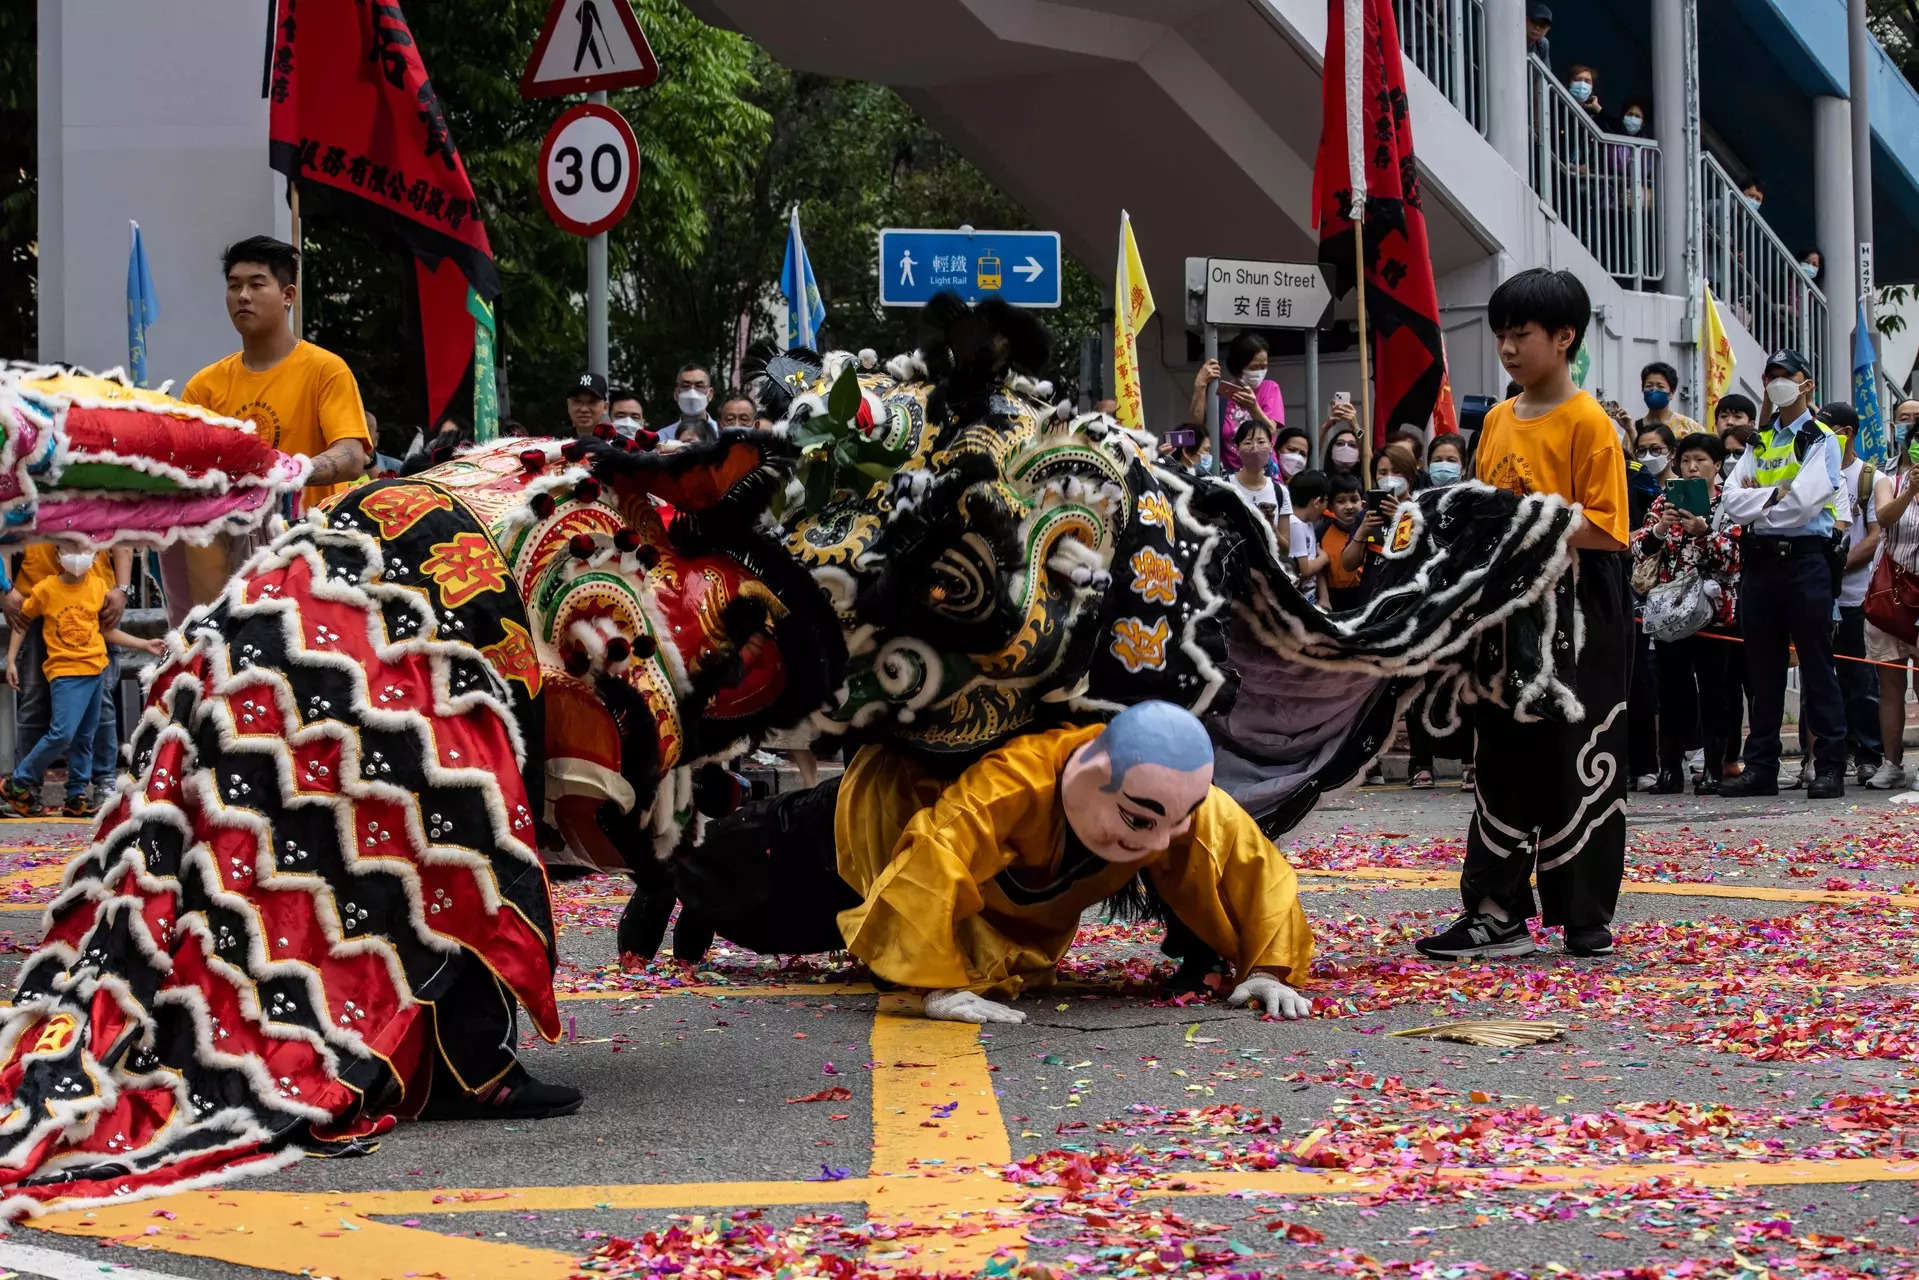 Fun-filled images from Tin Hau festival in Hong Kong